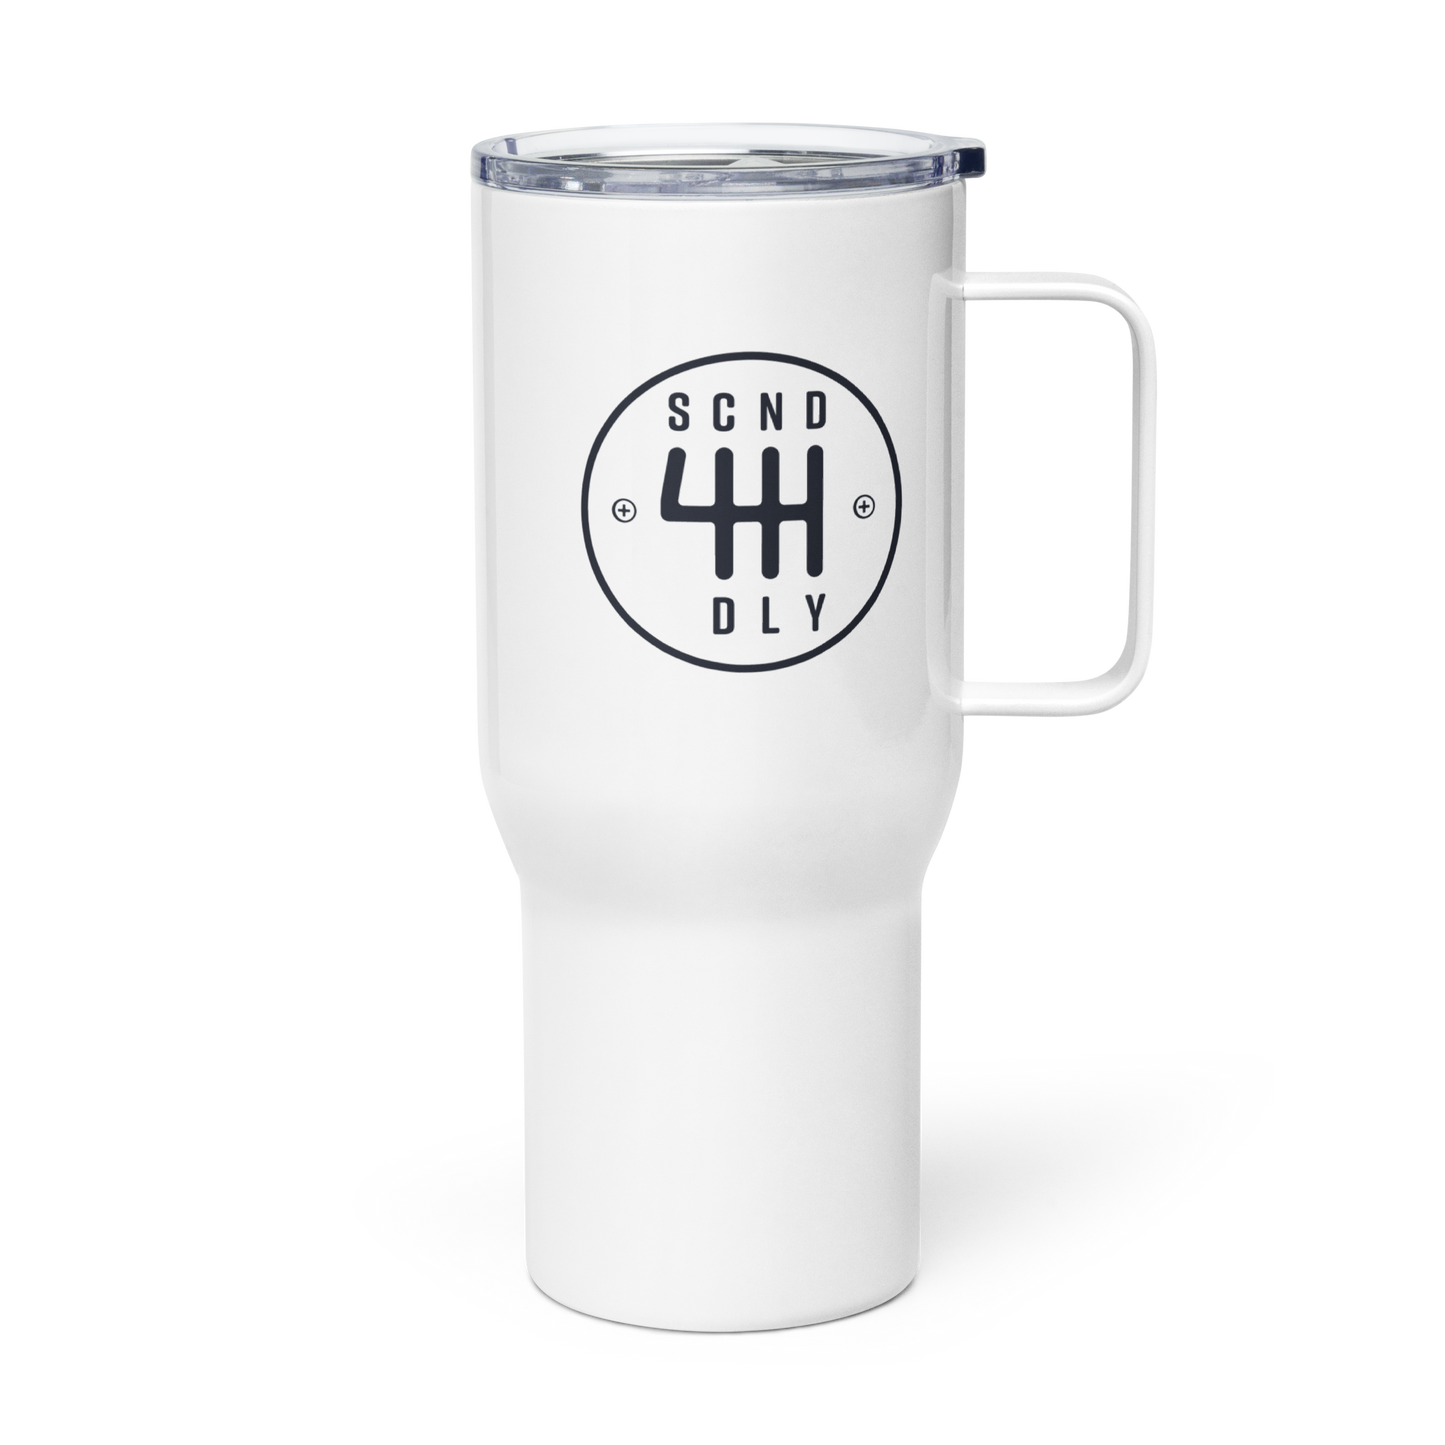 Second Daily - Defender 90 - Travel mug with a handle